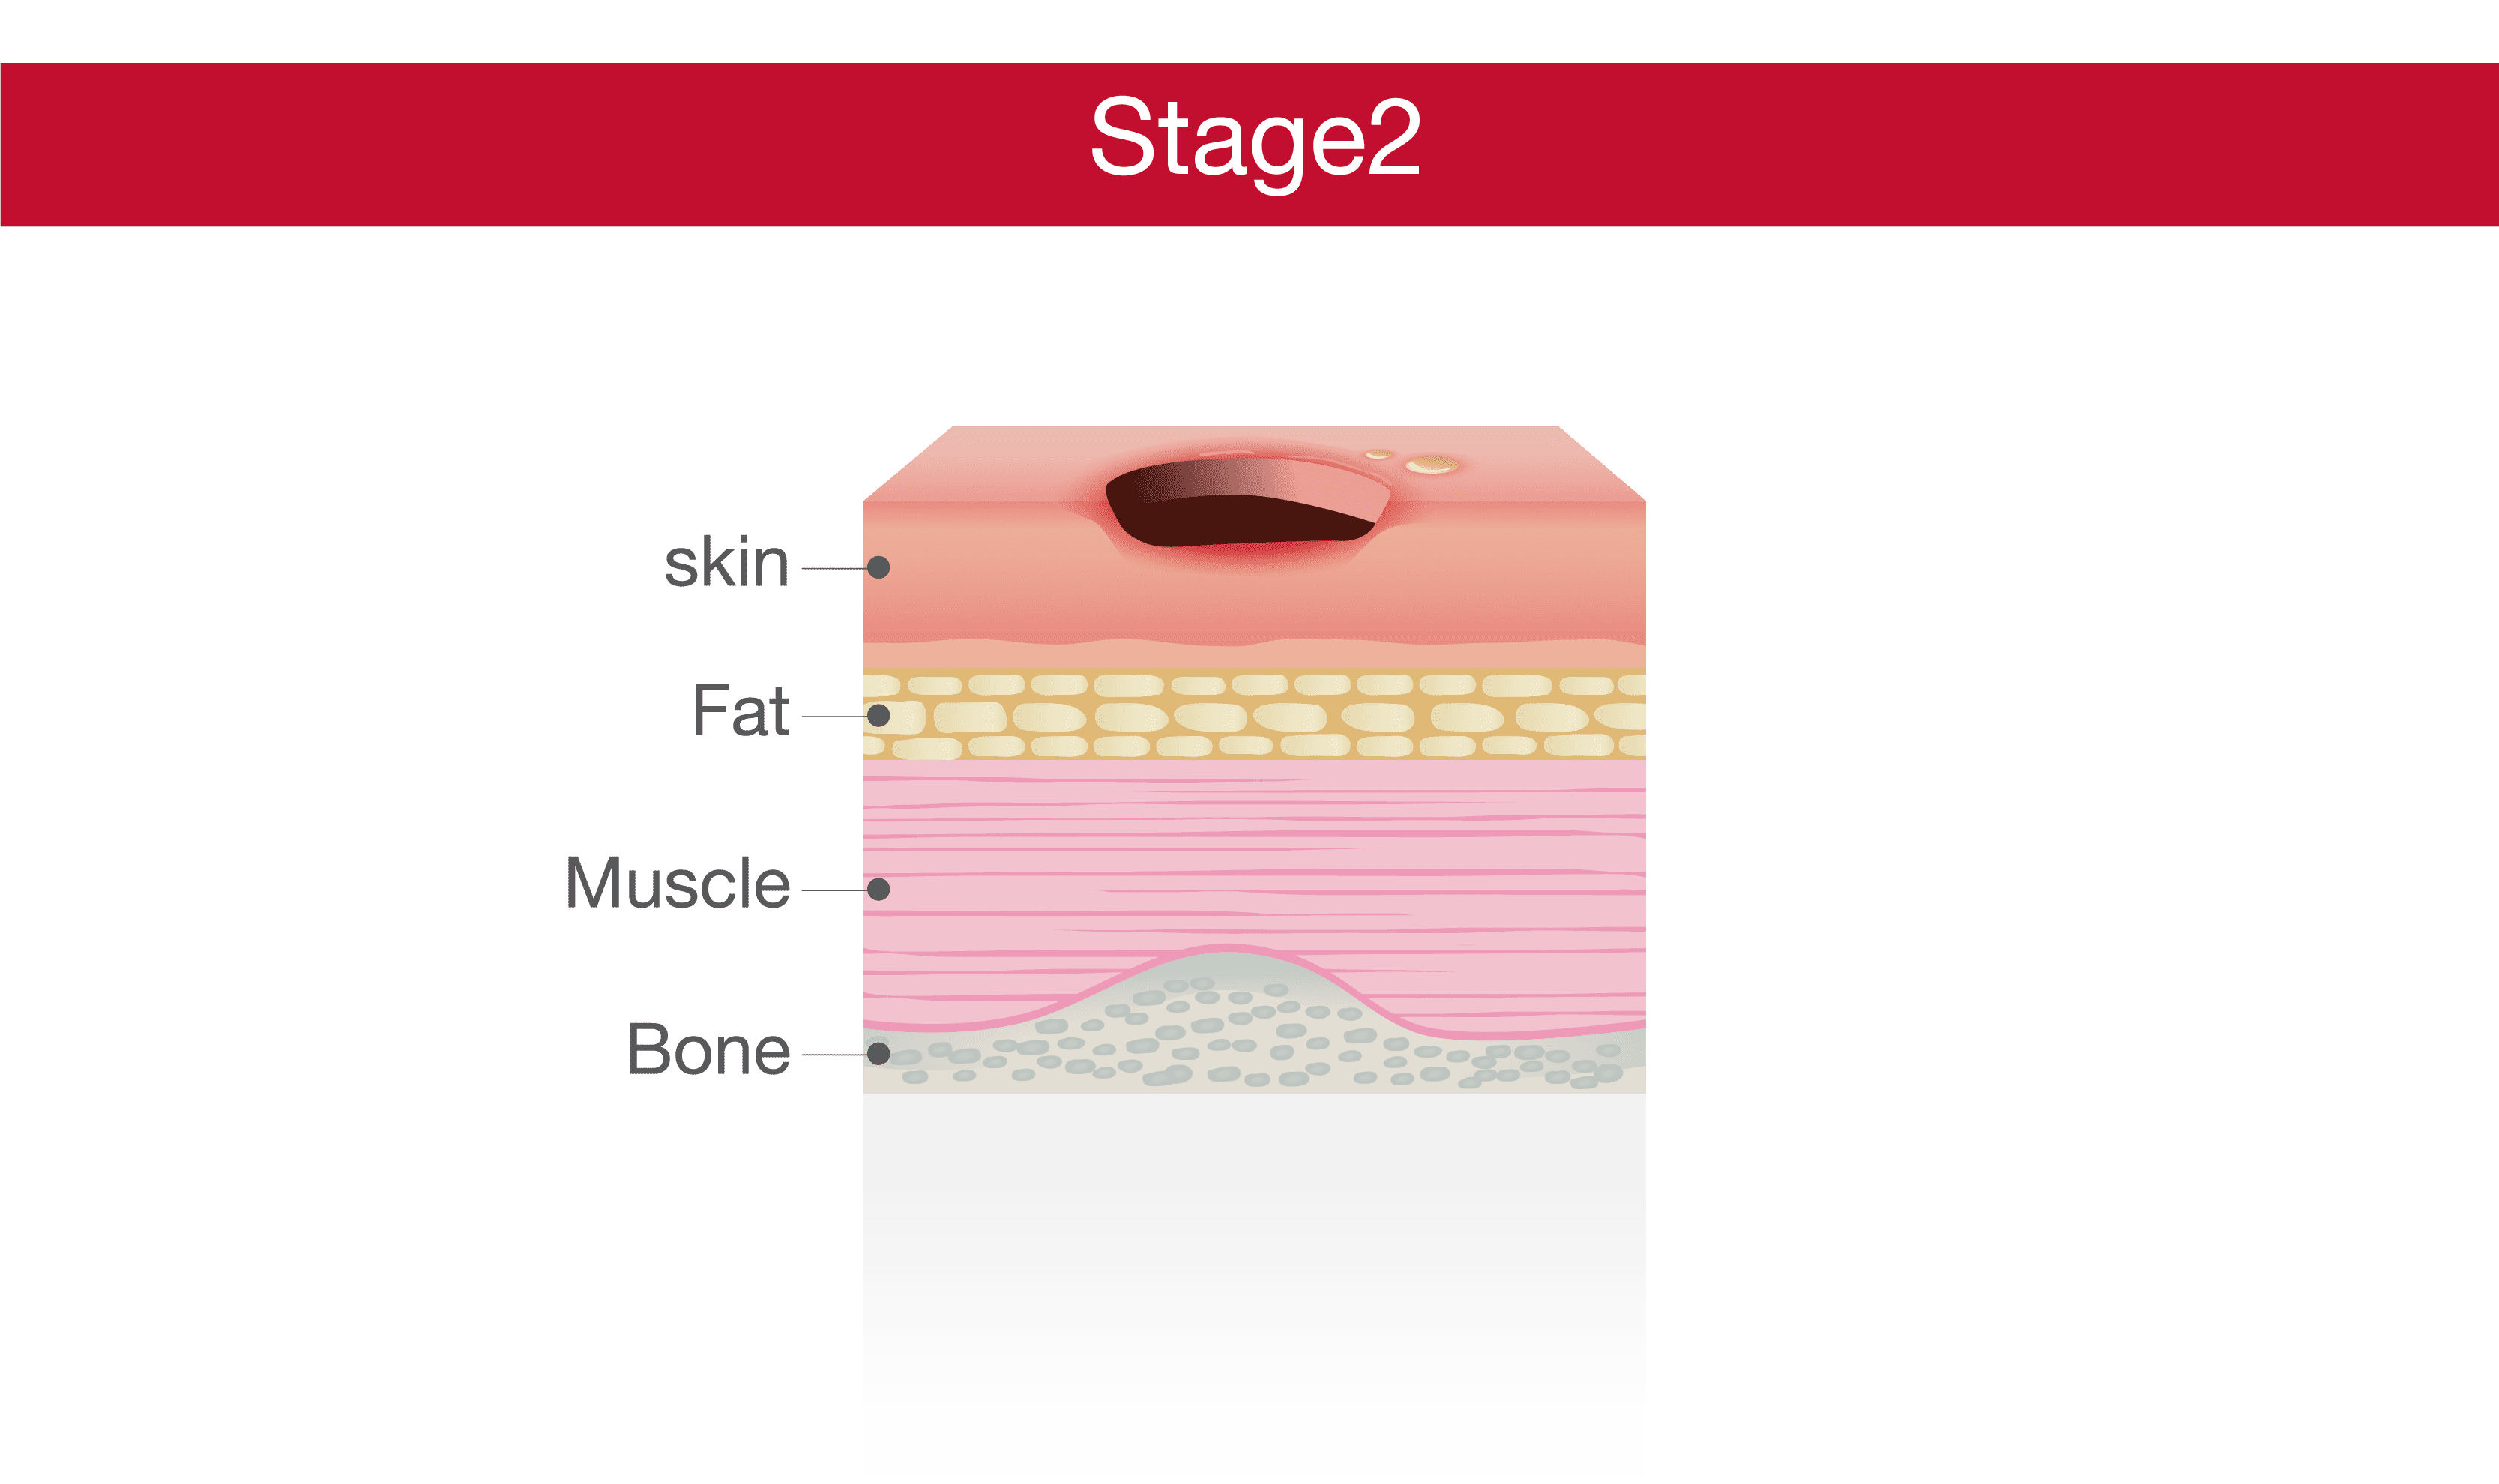 Bedsore Stage 2 - Shallow Ulcer